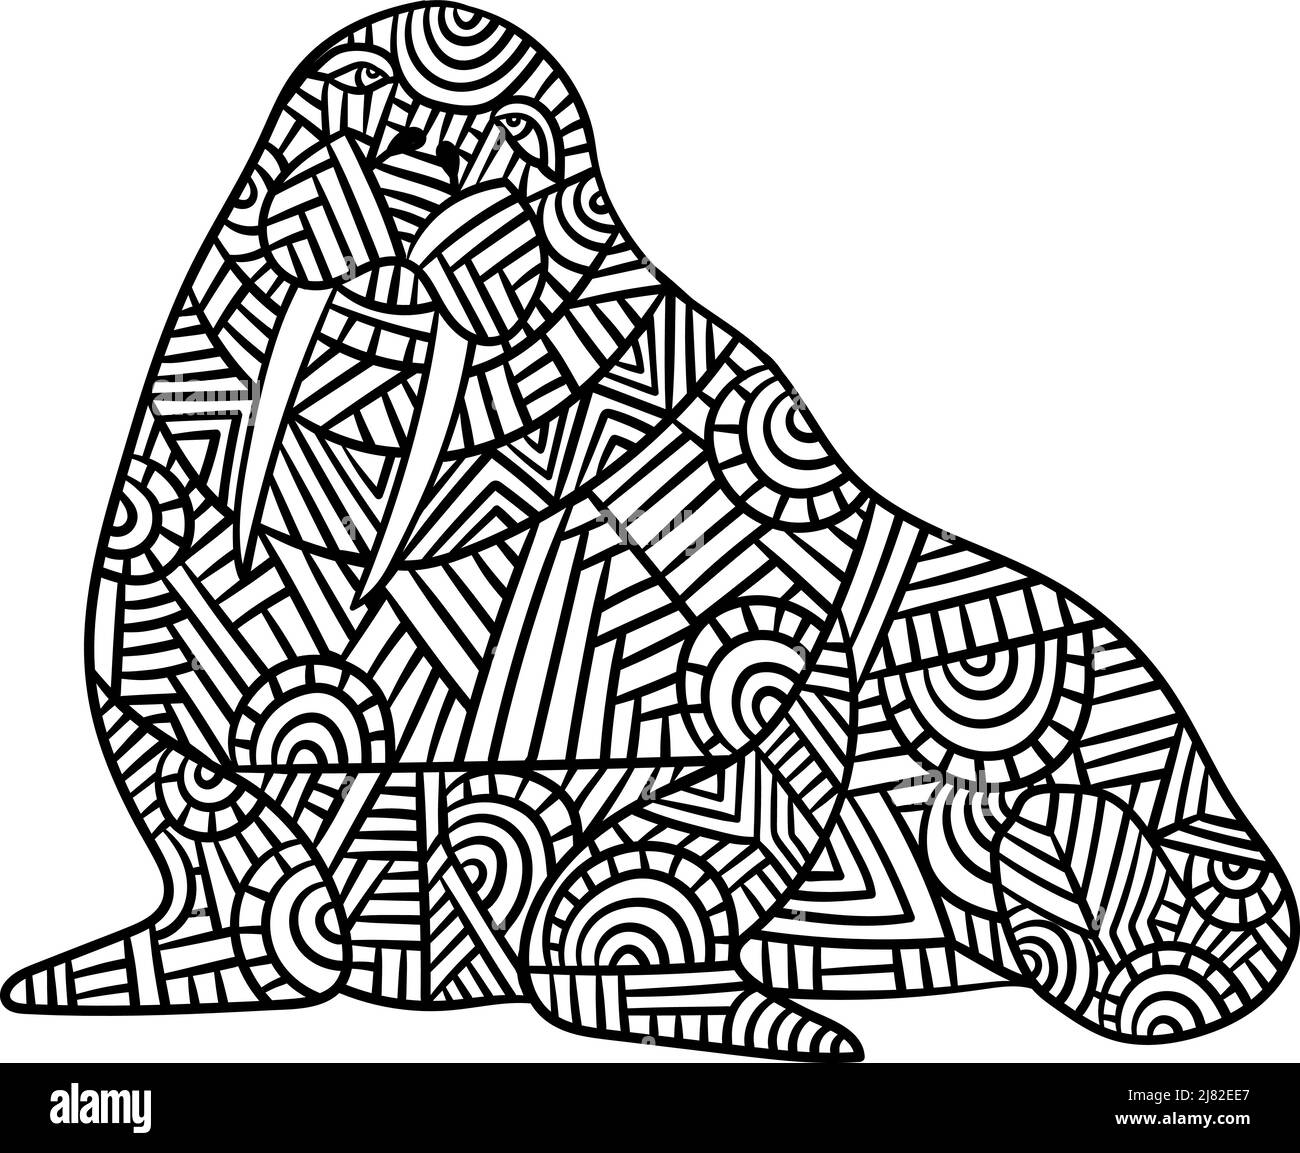 Walrus Mandala Coloring Pages for Adults Stock Vector